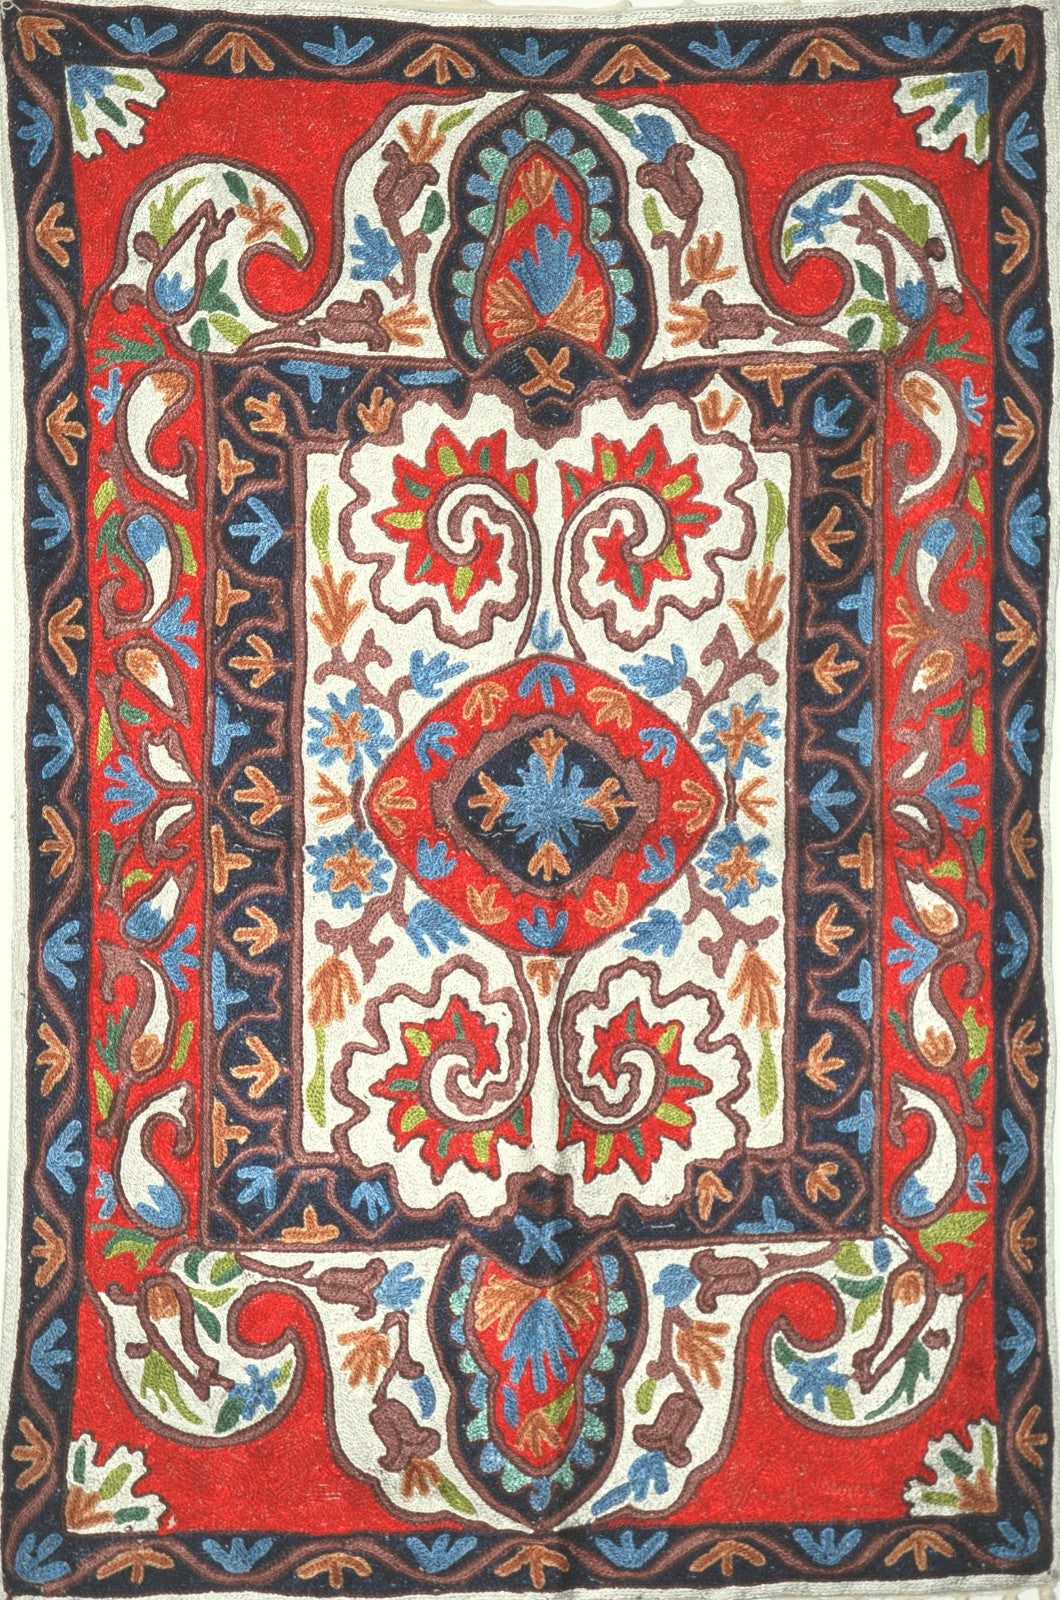 ChainStitch Tapestry Silk Area Rug, Multicolor Embroidery 2x3 feet #CWR6202